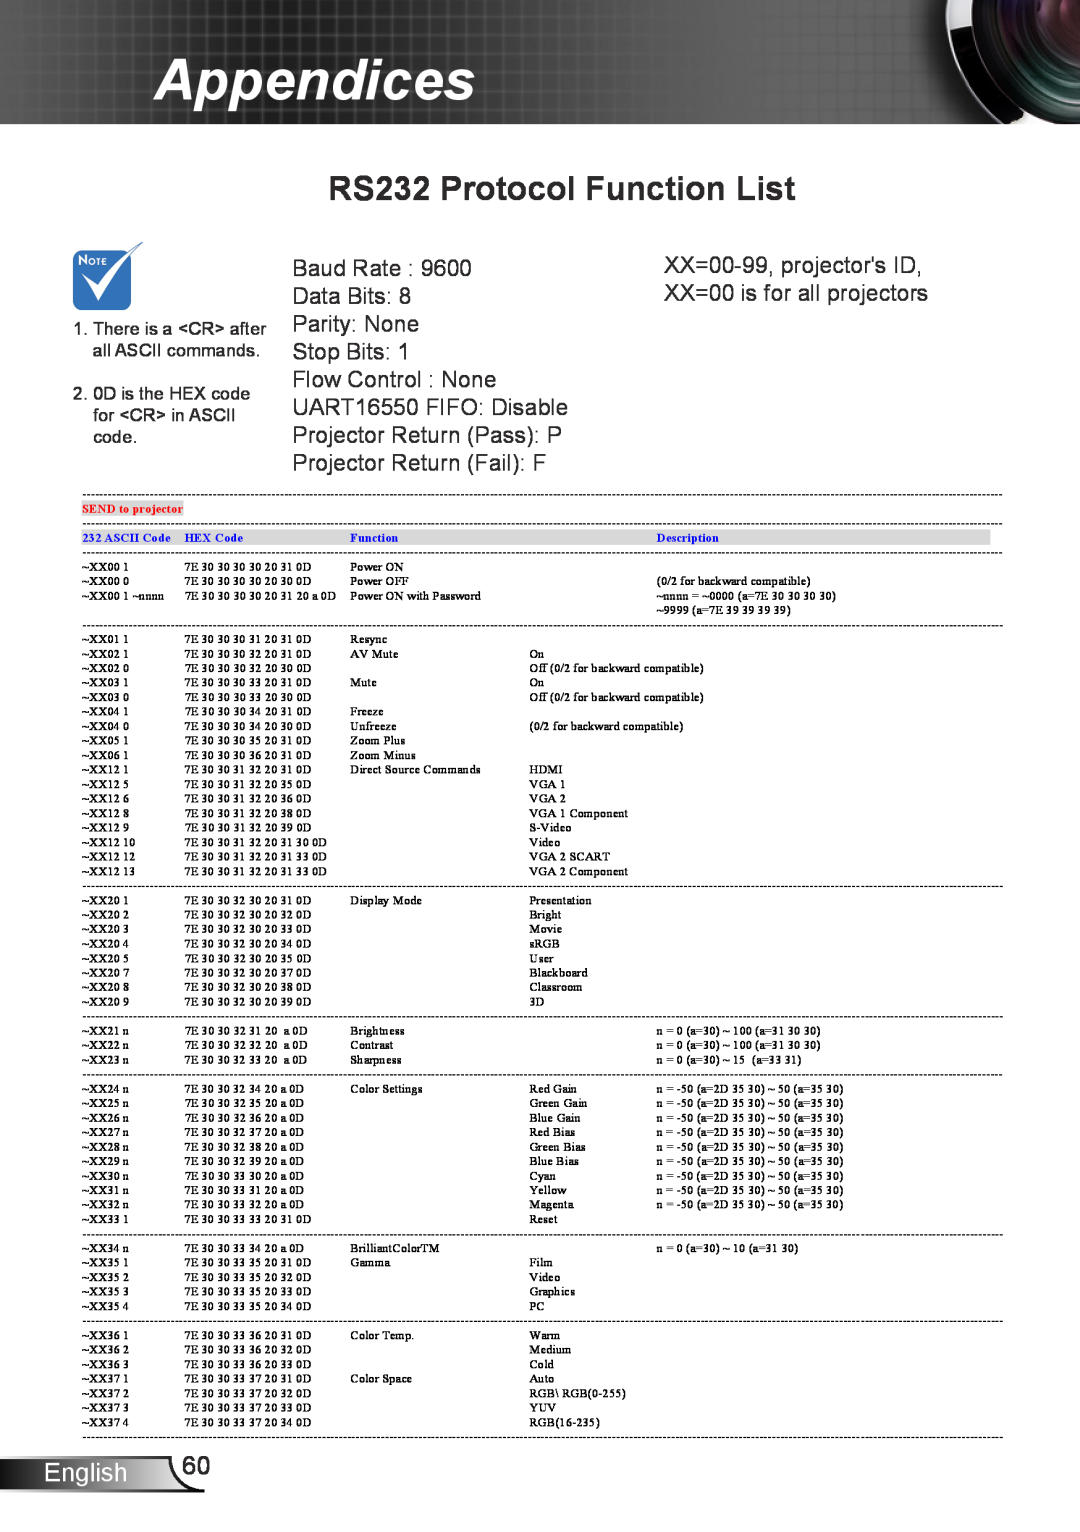 Optoma Technology TW615GOV manual RS232 Protocol Function List, Appendices, English, There is a CR after all ASCII commands 